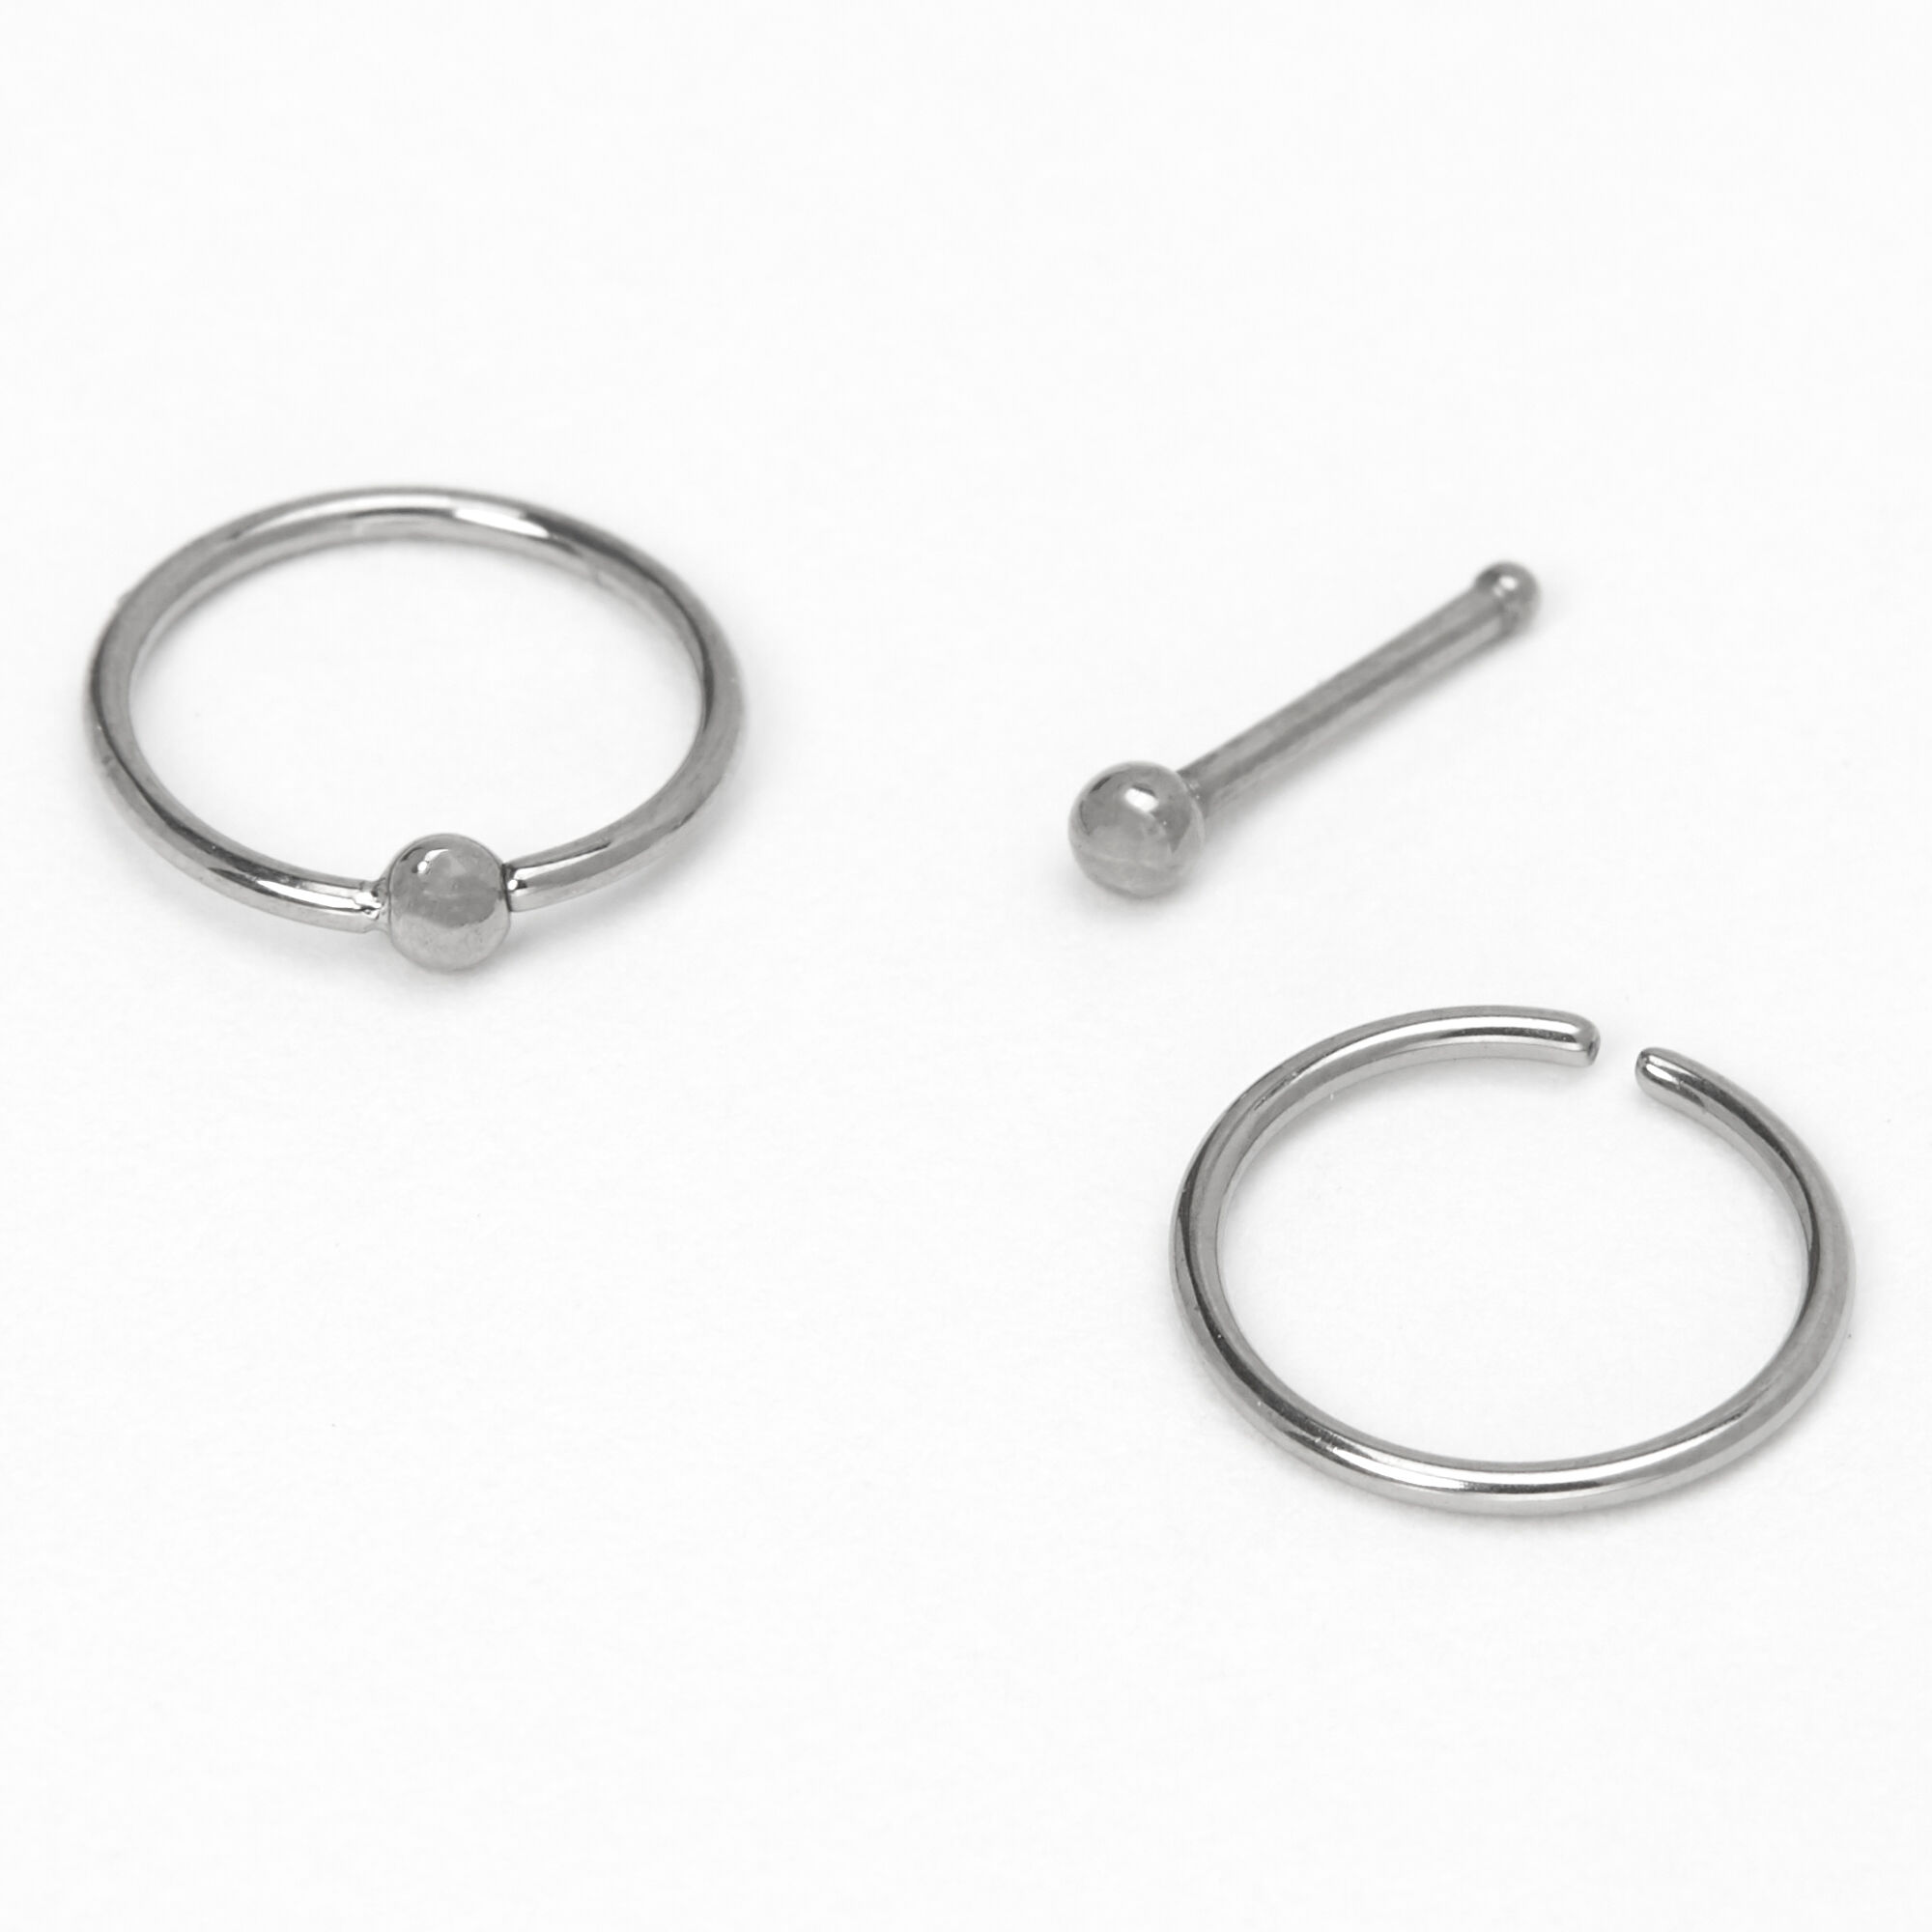 View Claires Tone Titanium 20G Classic Stud Hoop Nose Rings 3 Pack Silver information